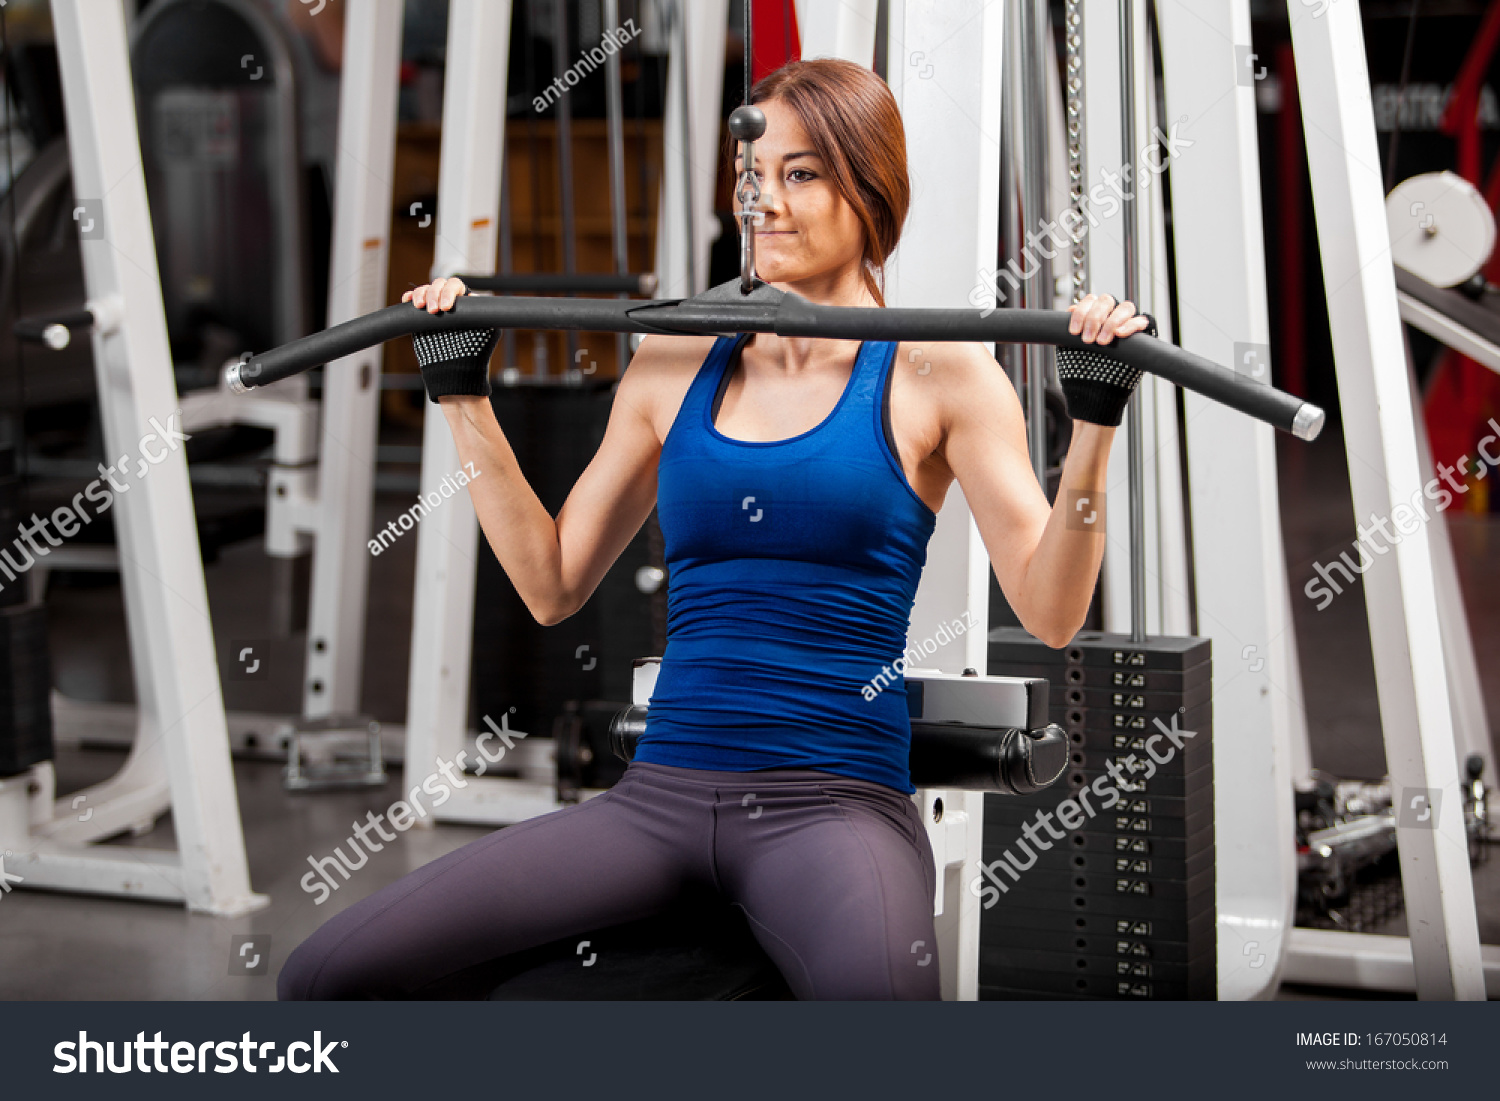 Pretty young athletic woman building some muscle in a simulator at the gym